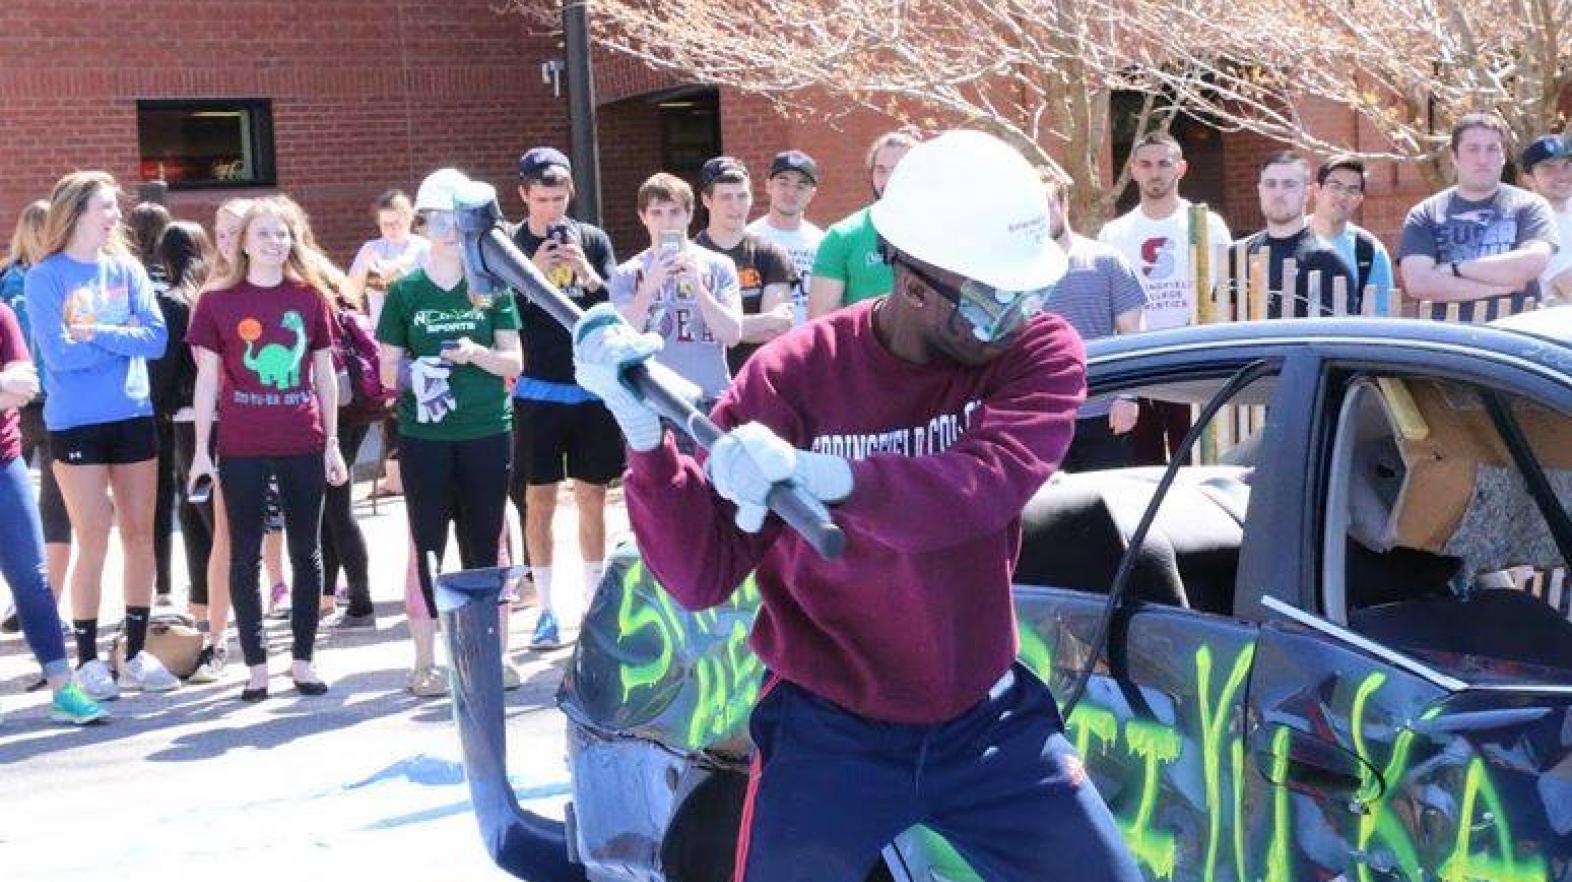 A student swings a hammer at a car as part of the whack-a-car event at Sti-Yu-Ka